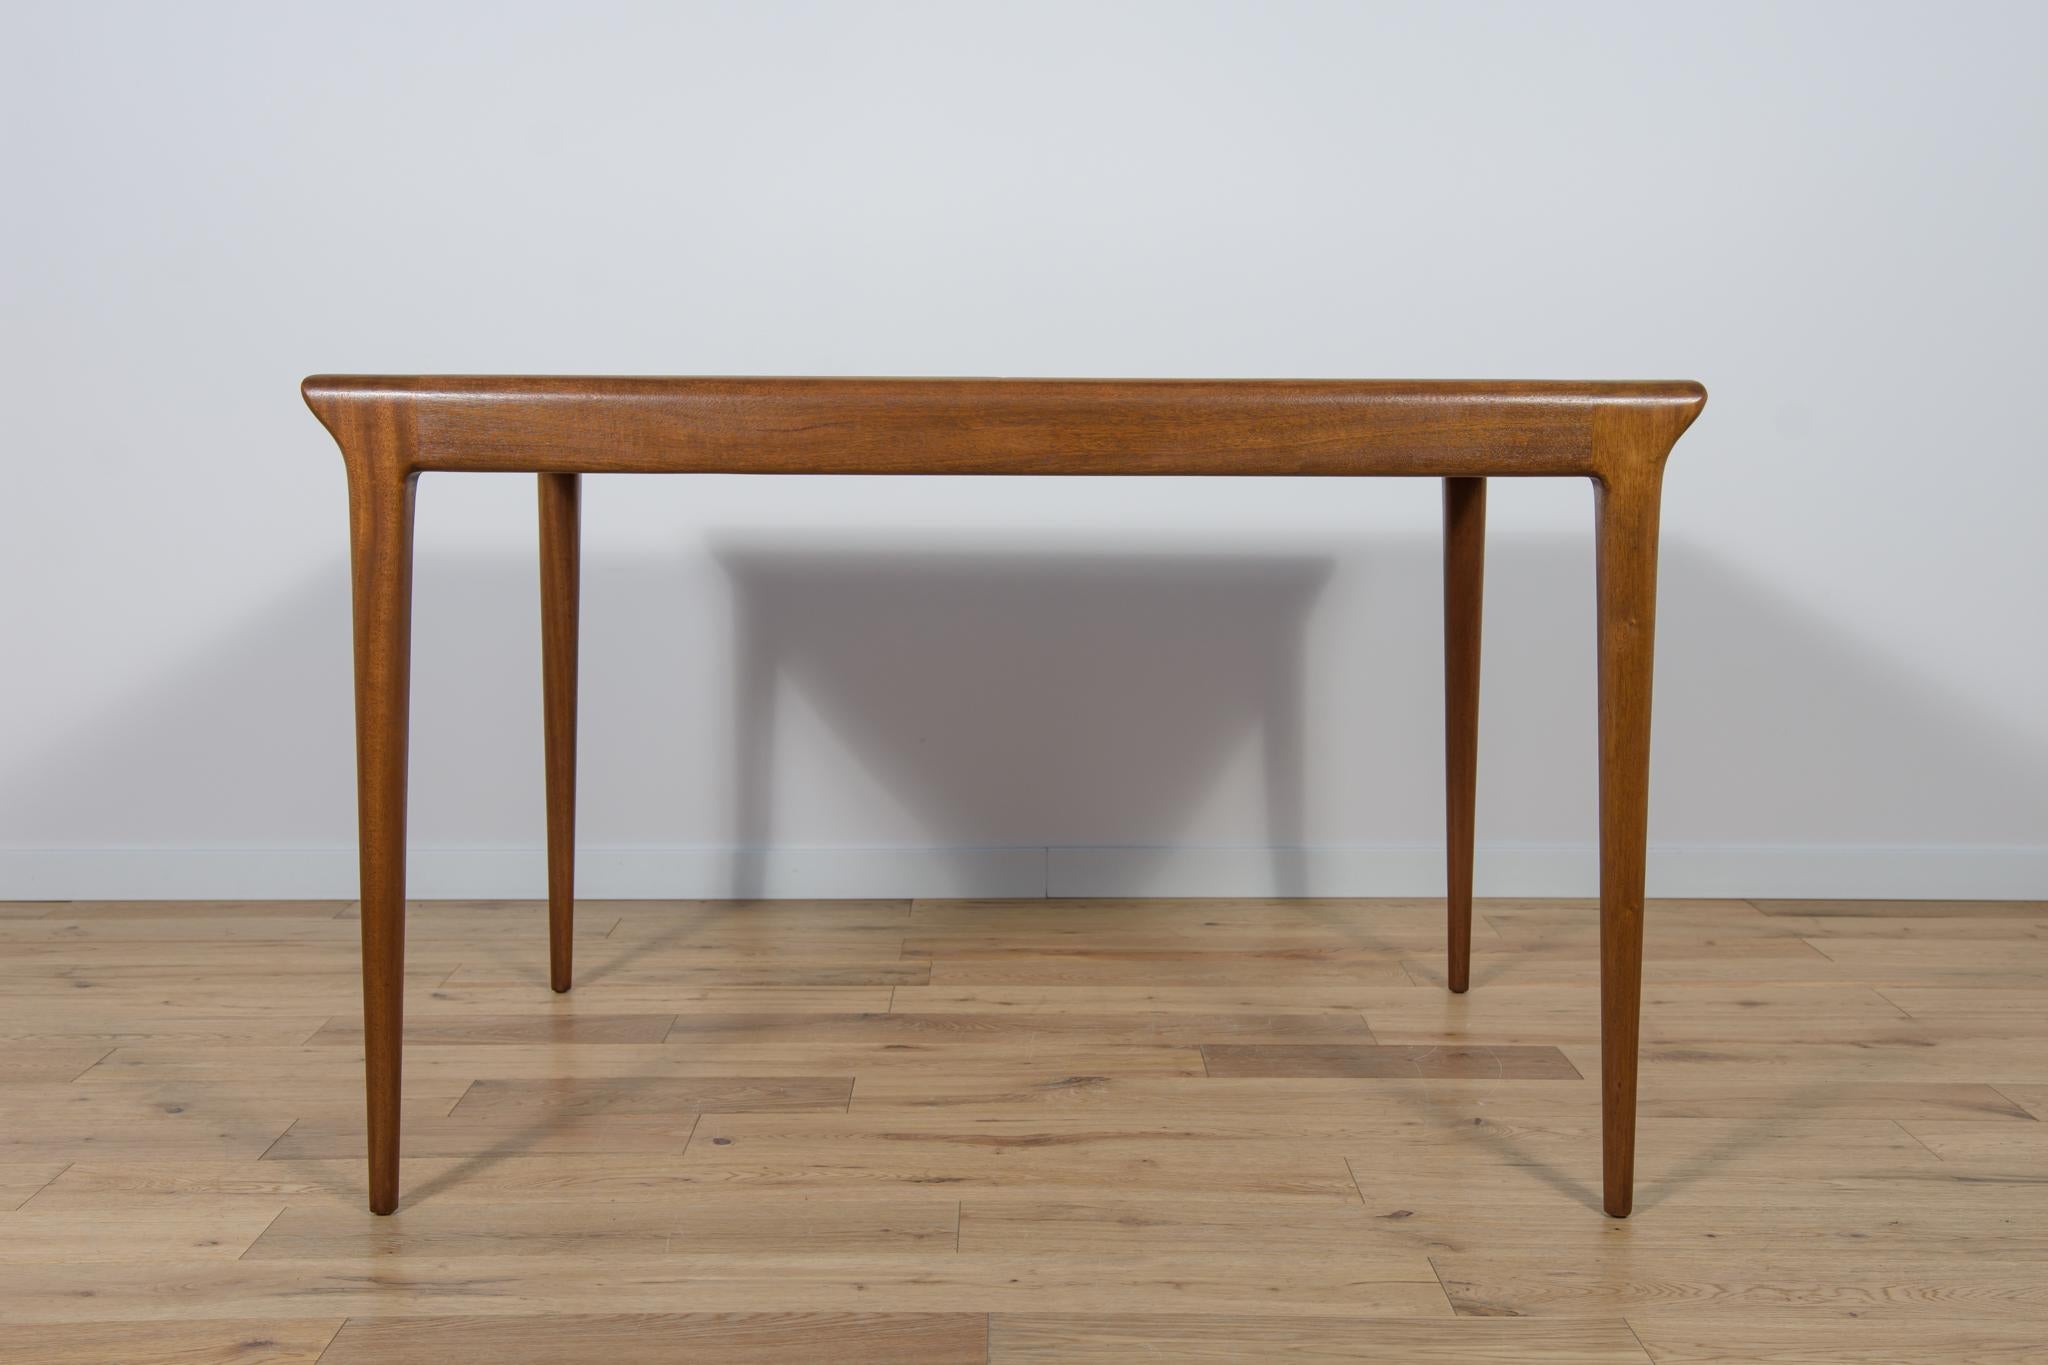 A rectangular table with a light, sublime form, manufactured by the British McIntosh manufactory in the 1960s. The table is made of teak wood, the top is veneered with zebrano wood. The table has a unique simple mechanism that facilitates unfolding.